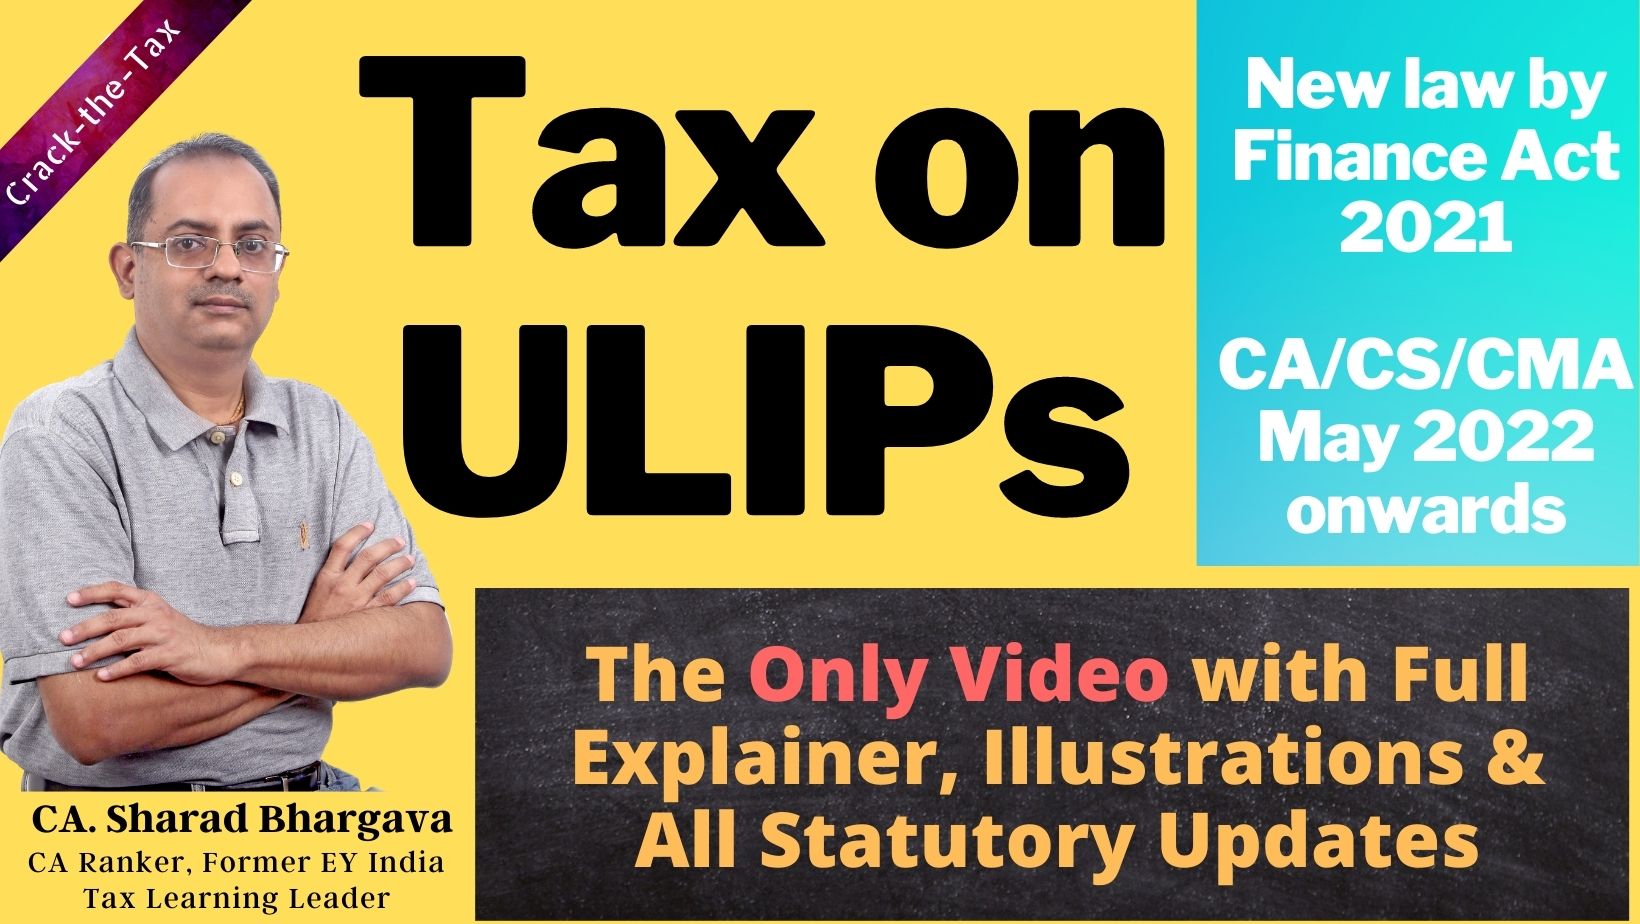 Taxation of ULIP // New law by Finance Act 2021 // By CA. Sharad Bhargava